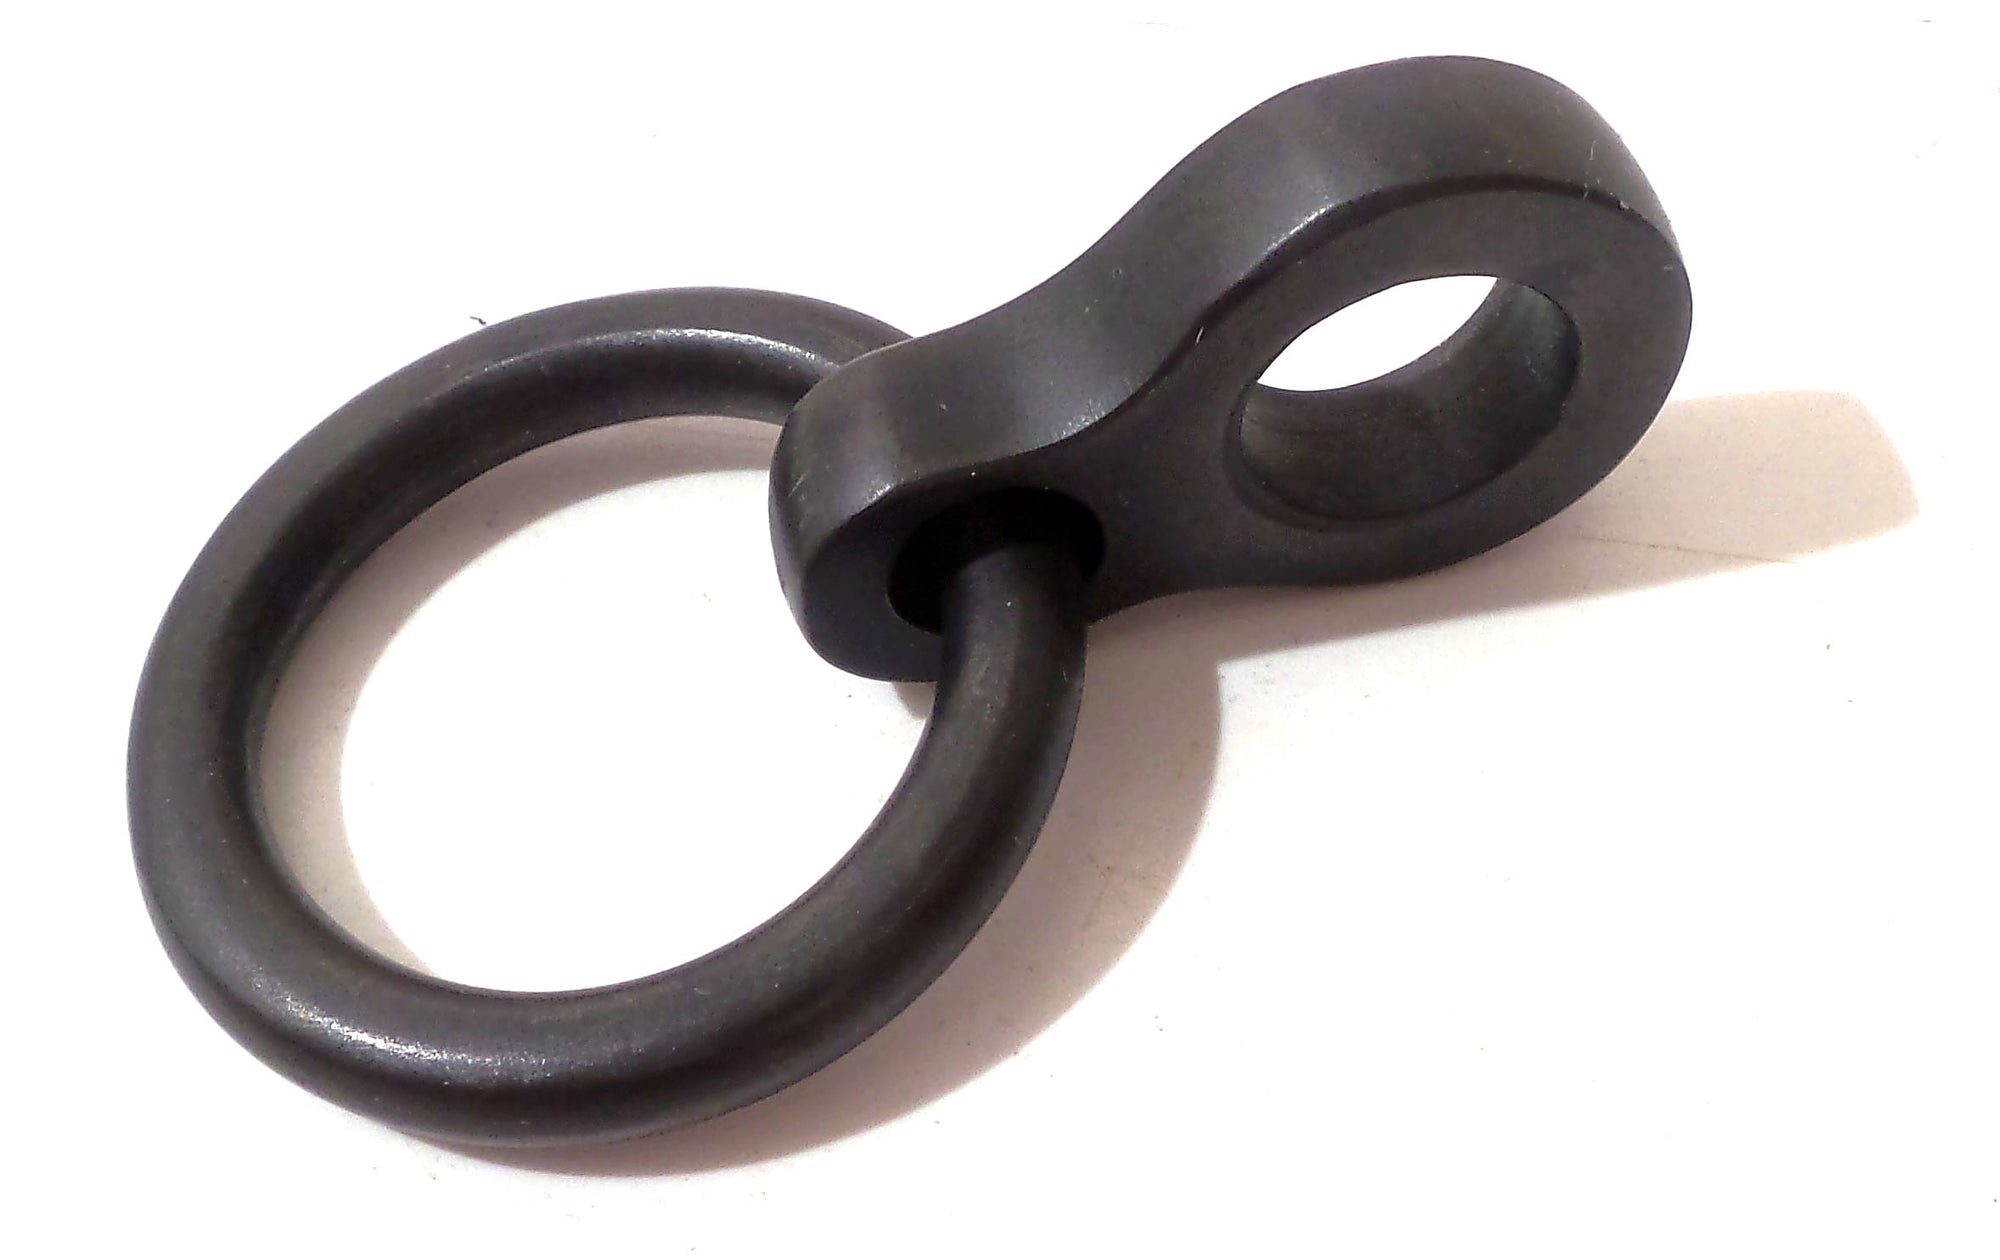 Removable Ring for KB-899 Round Collars and KB-897 KB-898 Cuffs and Leg Irons